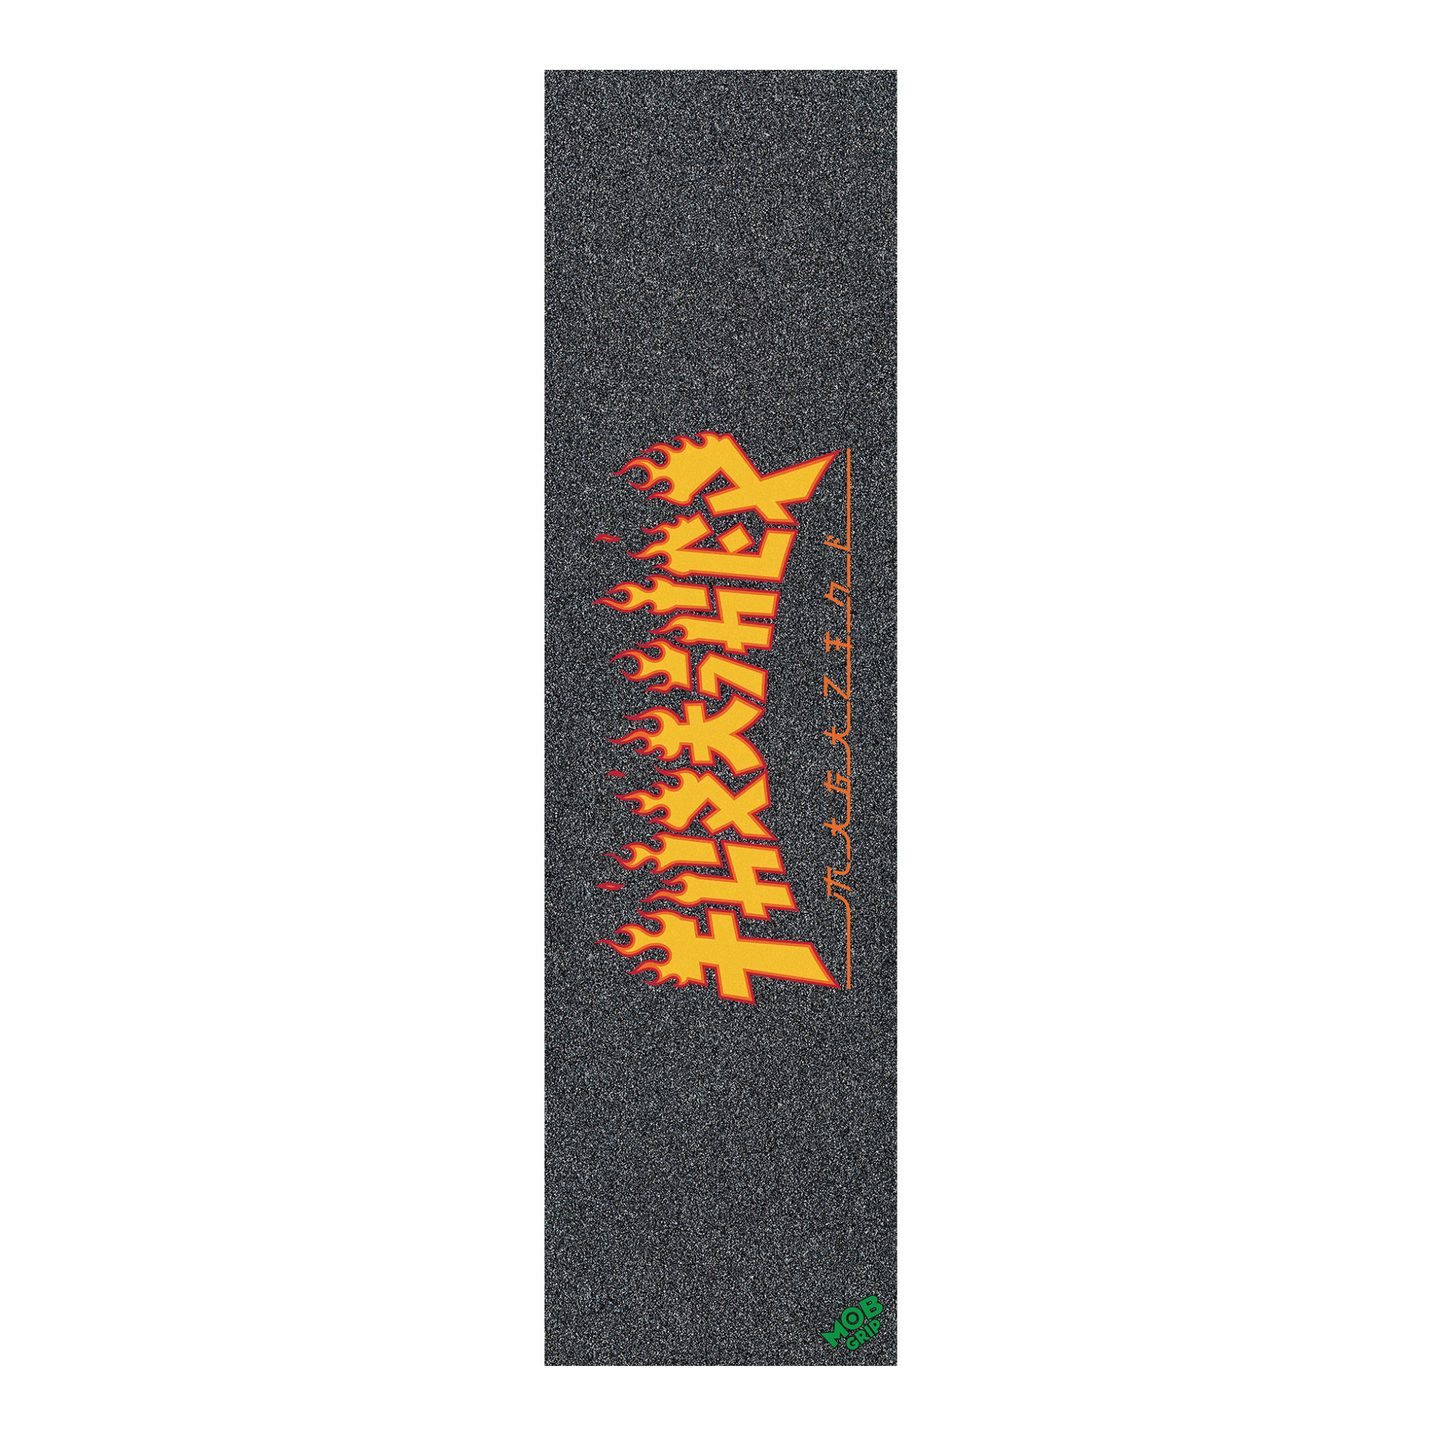 Thasher Monster Flame Mob Grip Tape